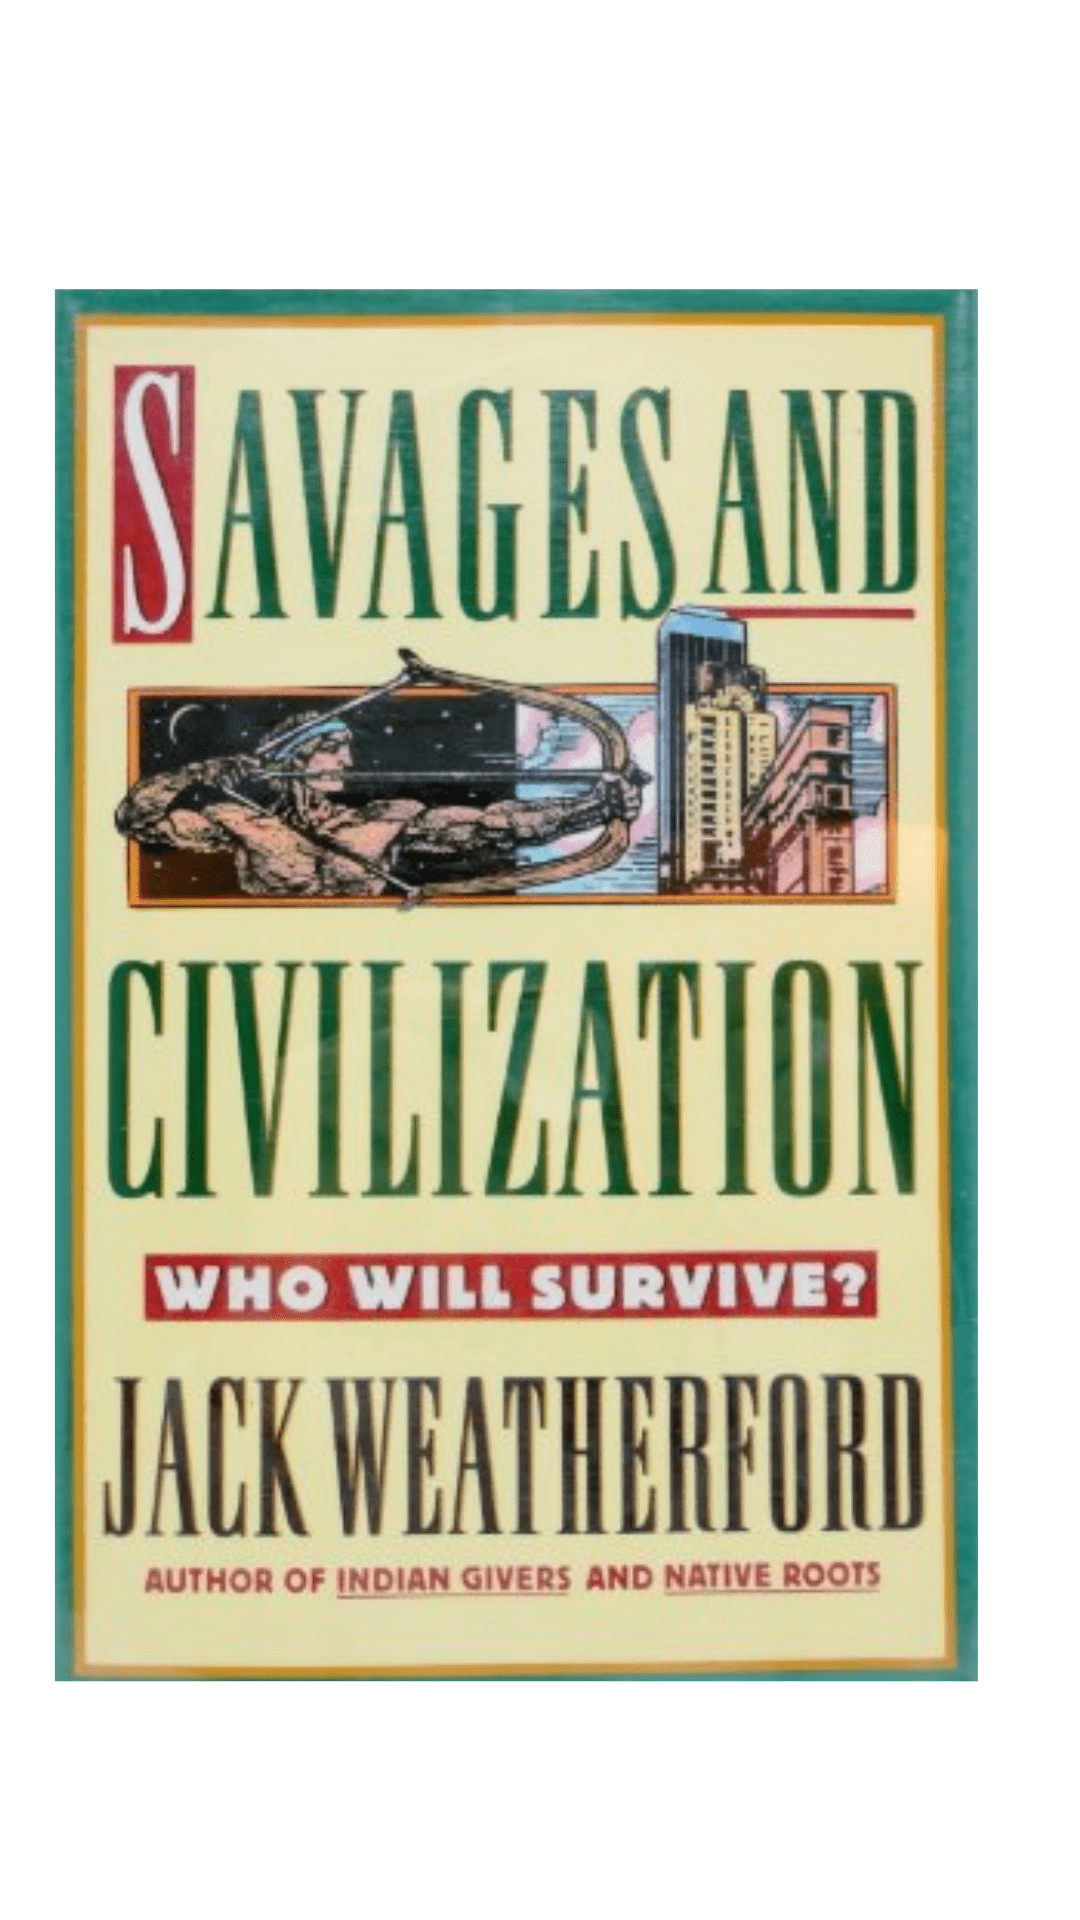 Savages and Civilization by Jack Weatherford